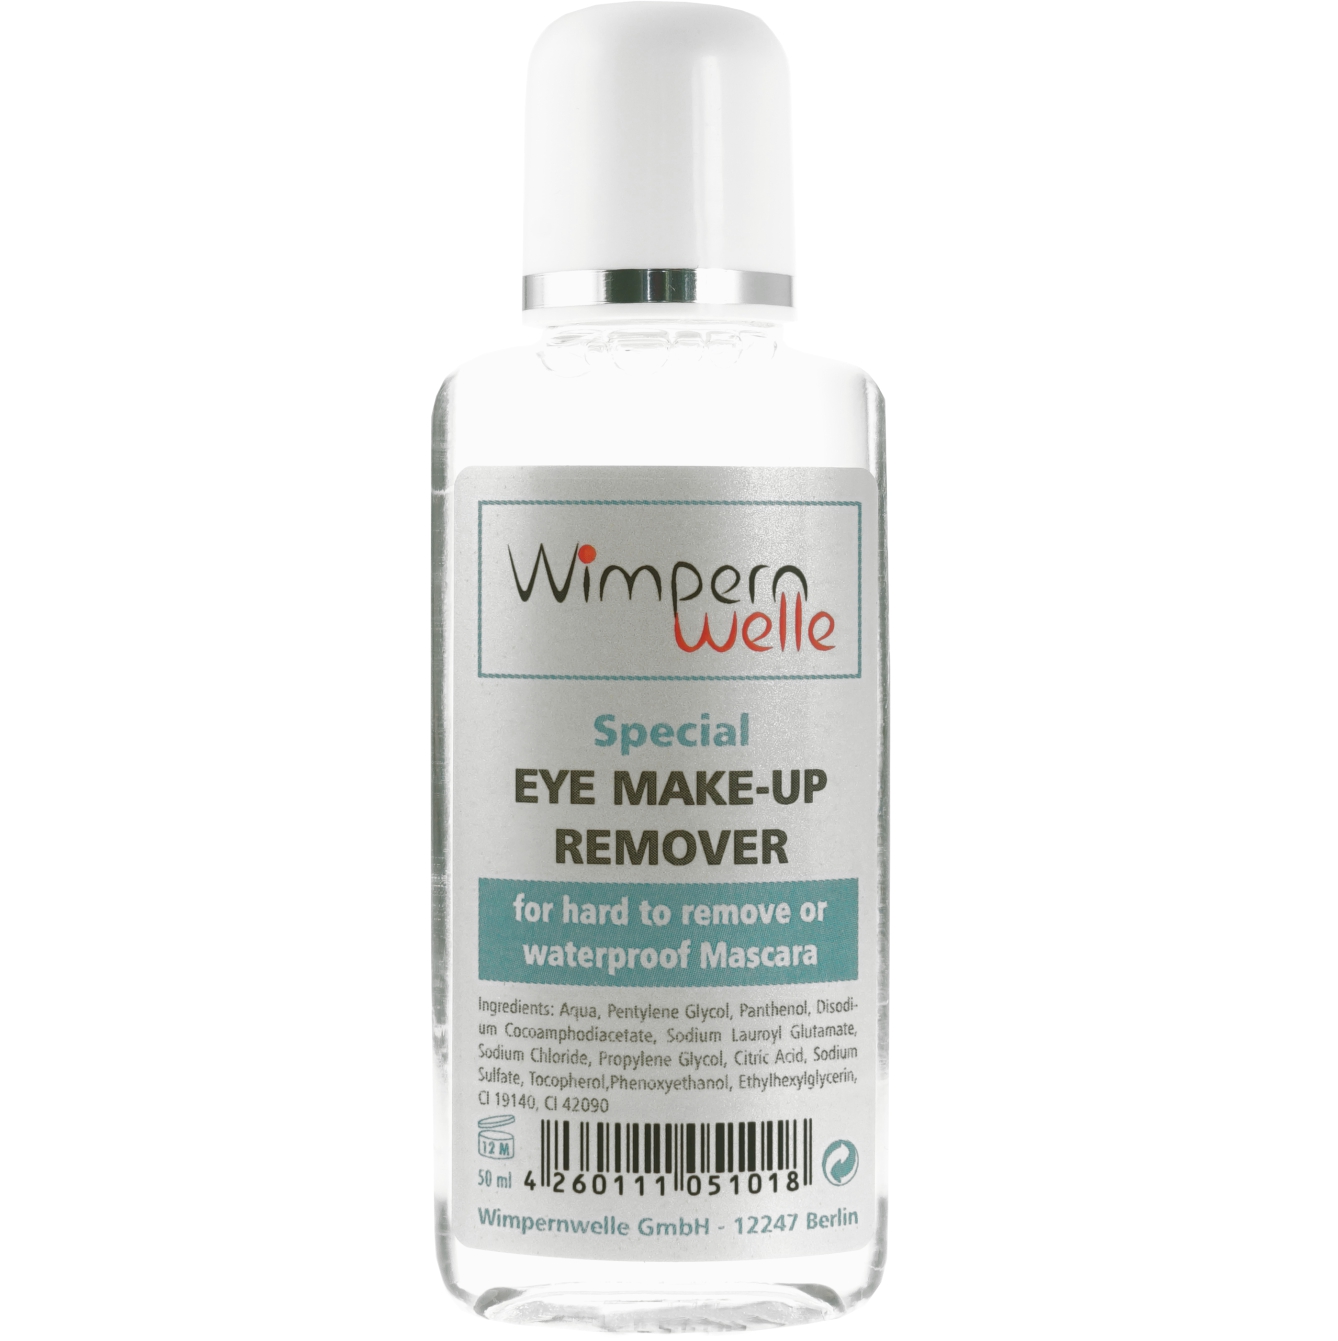 Special Eye Make-up Remover